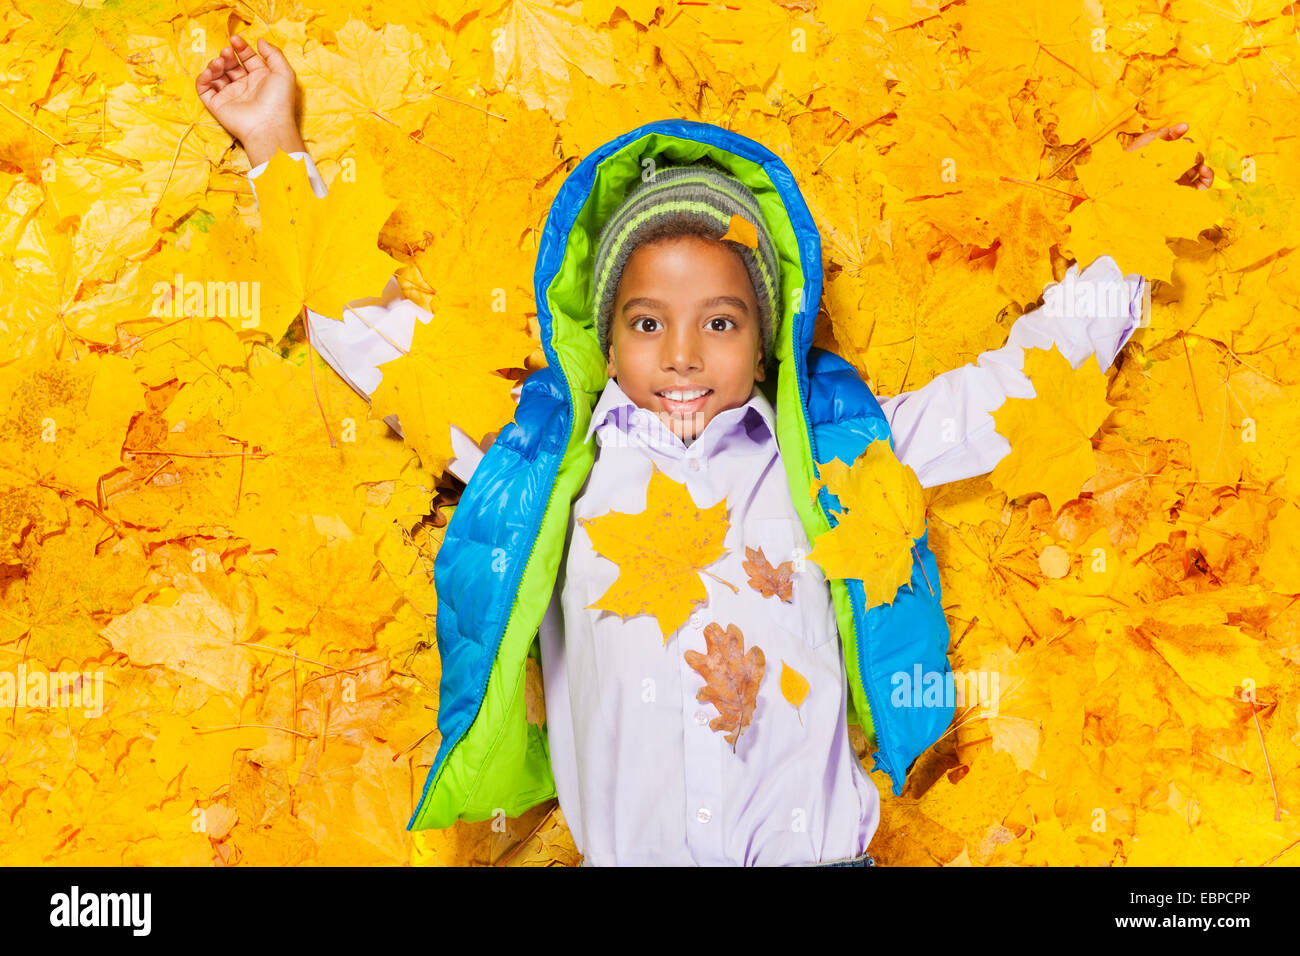 African boy laying in automne feuilles d'érable Banque D'Images